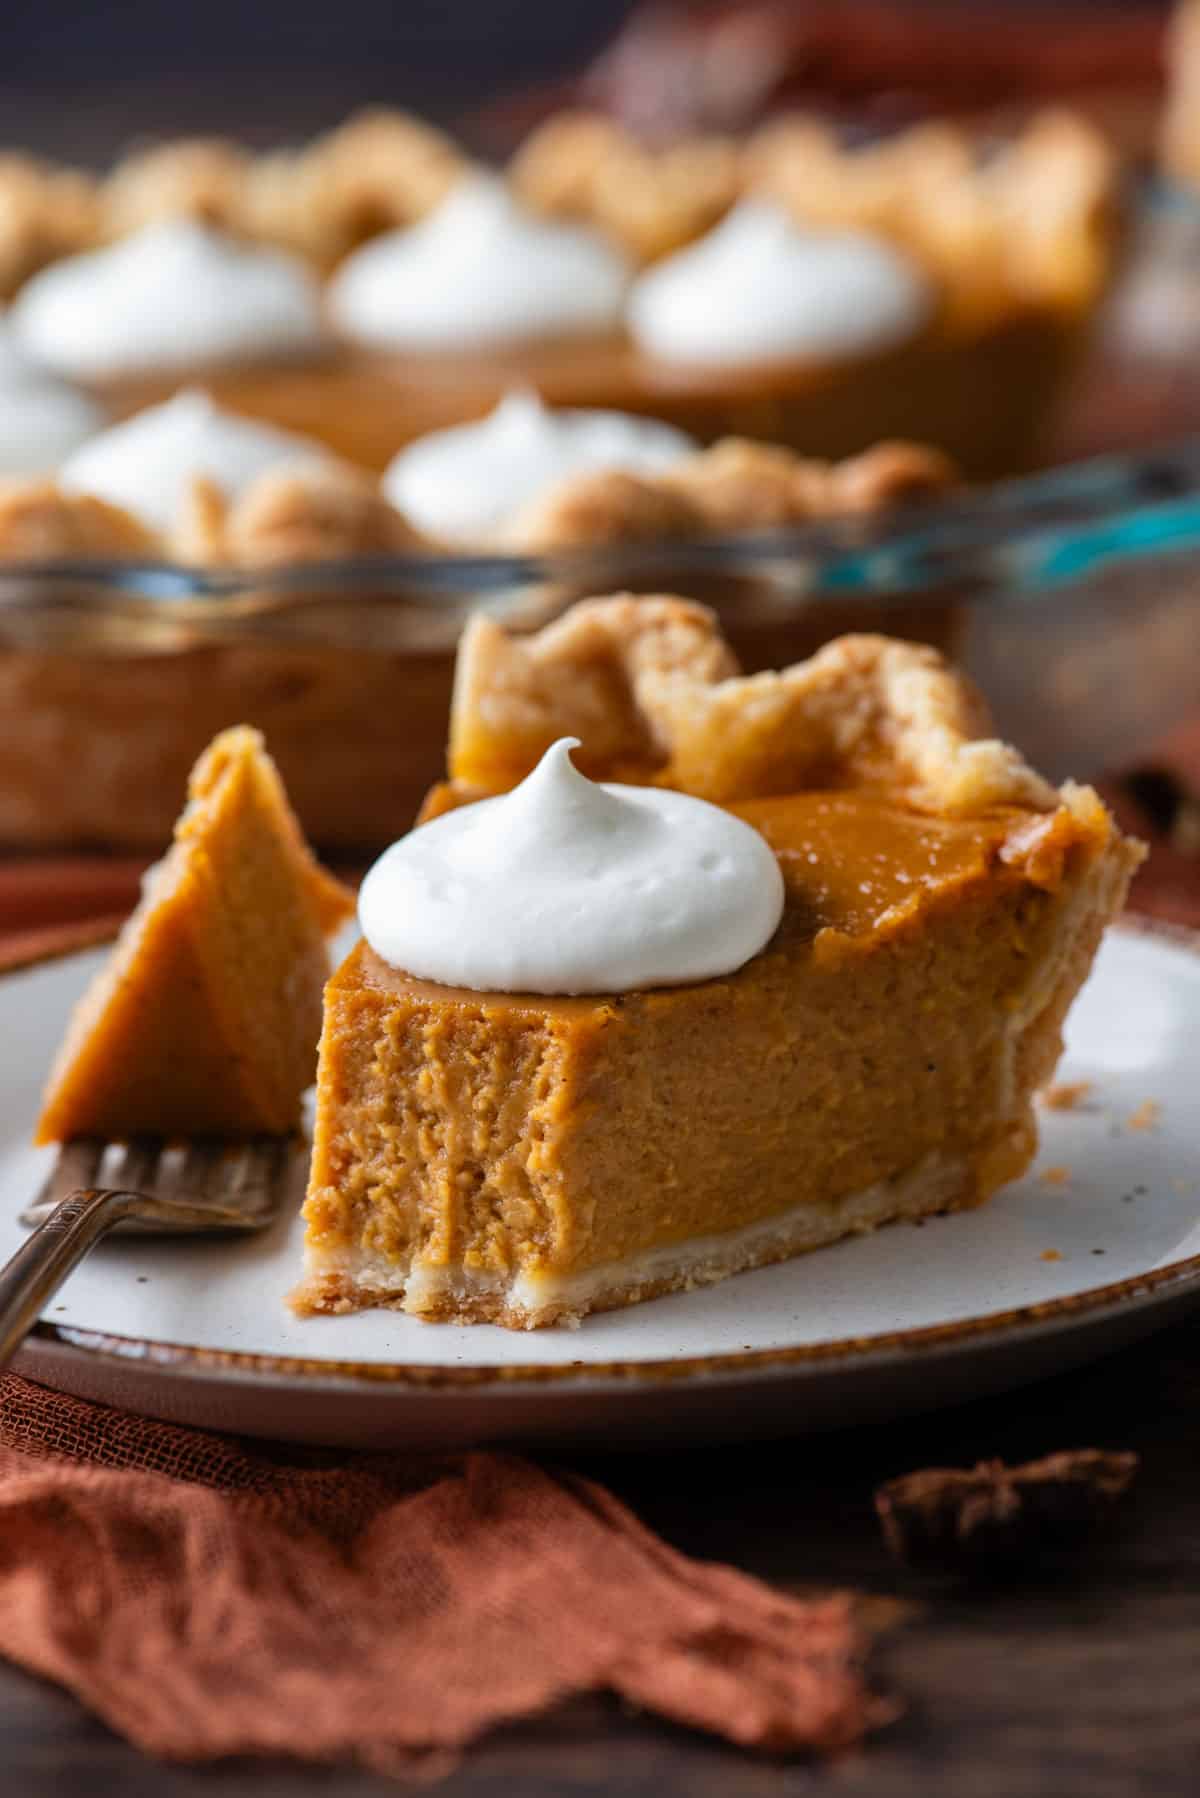 a slice of pumpkin pie on a white plate topped with a dollop of whipped cream, with a fork that has taken one bite out laying on the plate beside it, and the pie dish with the rest of the pie in the background